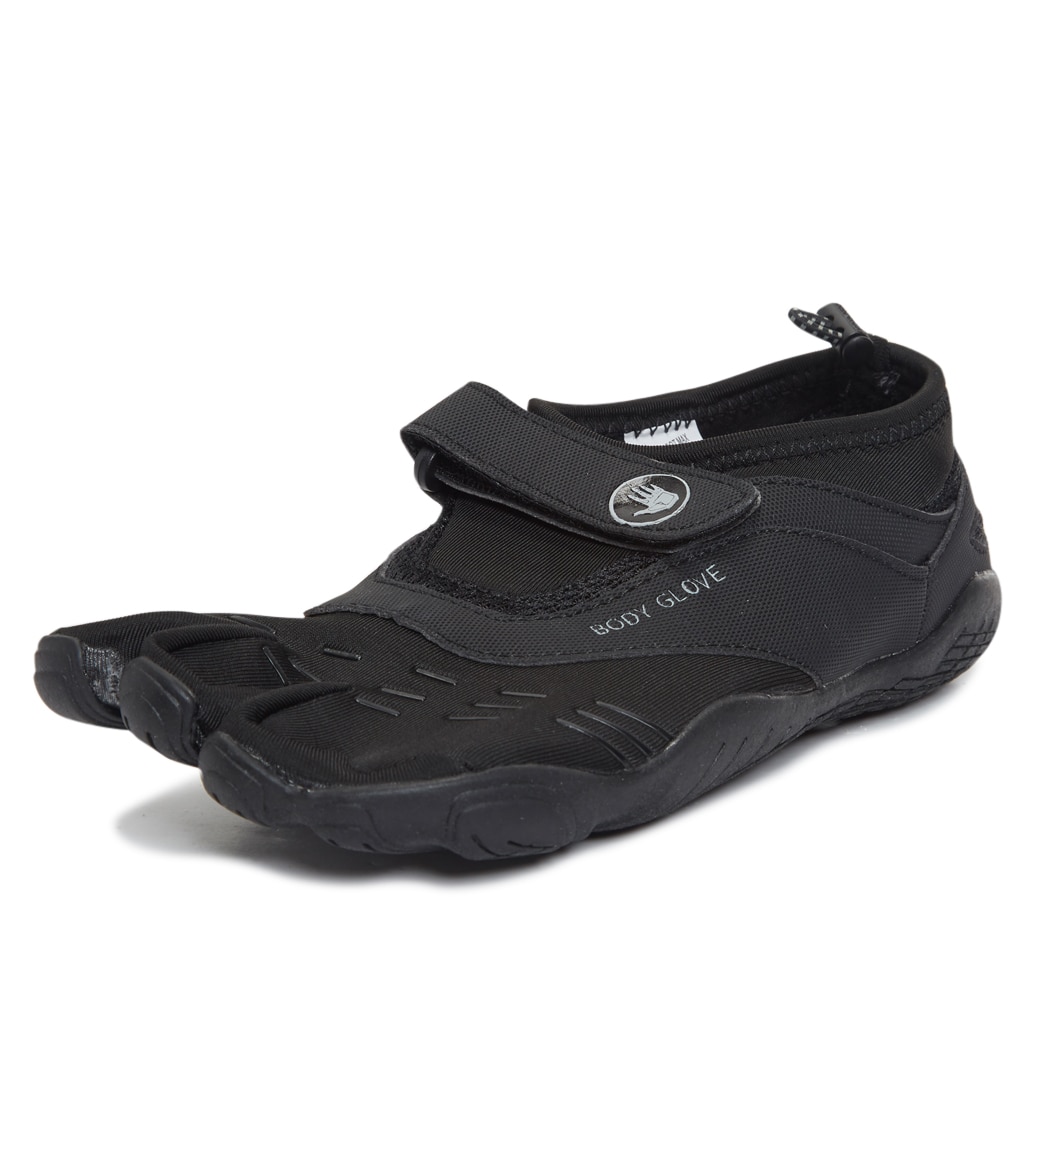 3t barefoot max water shoe